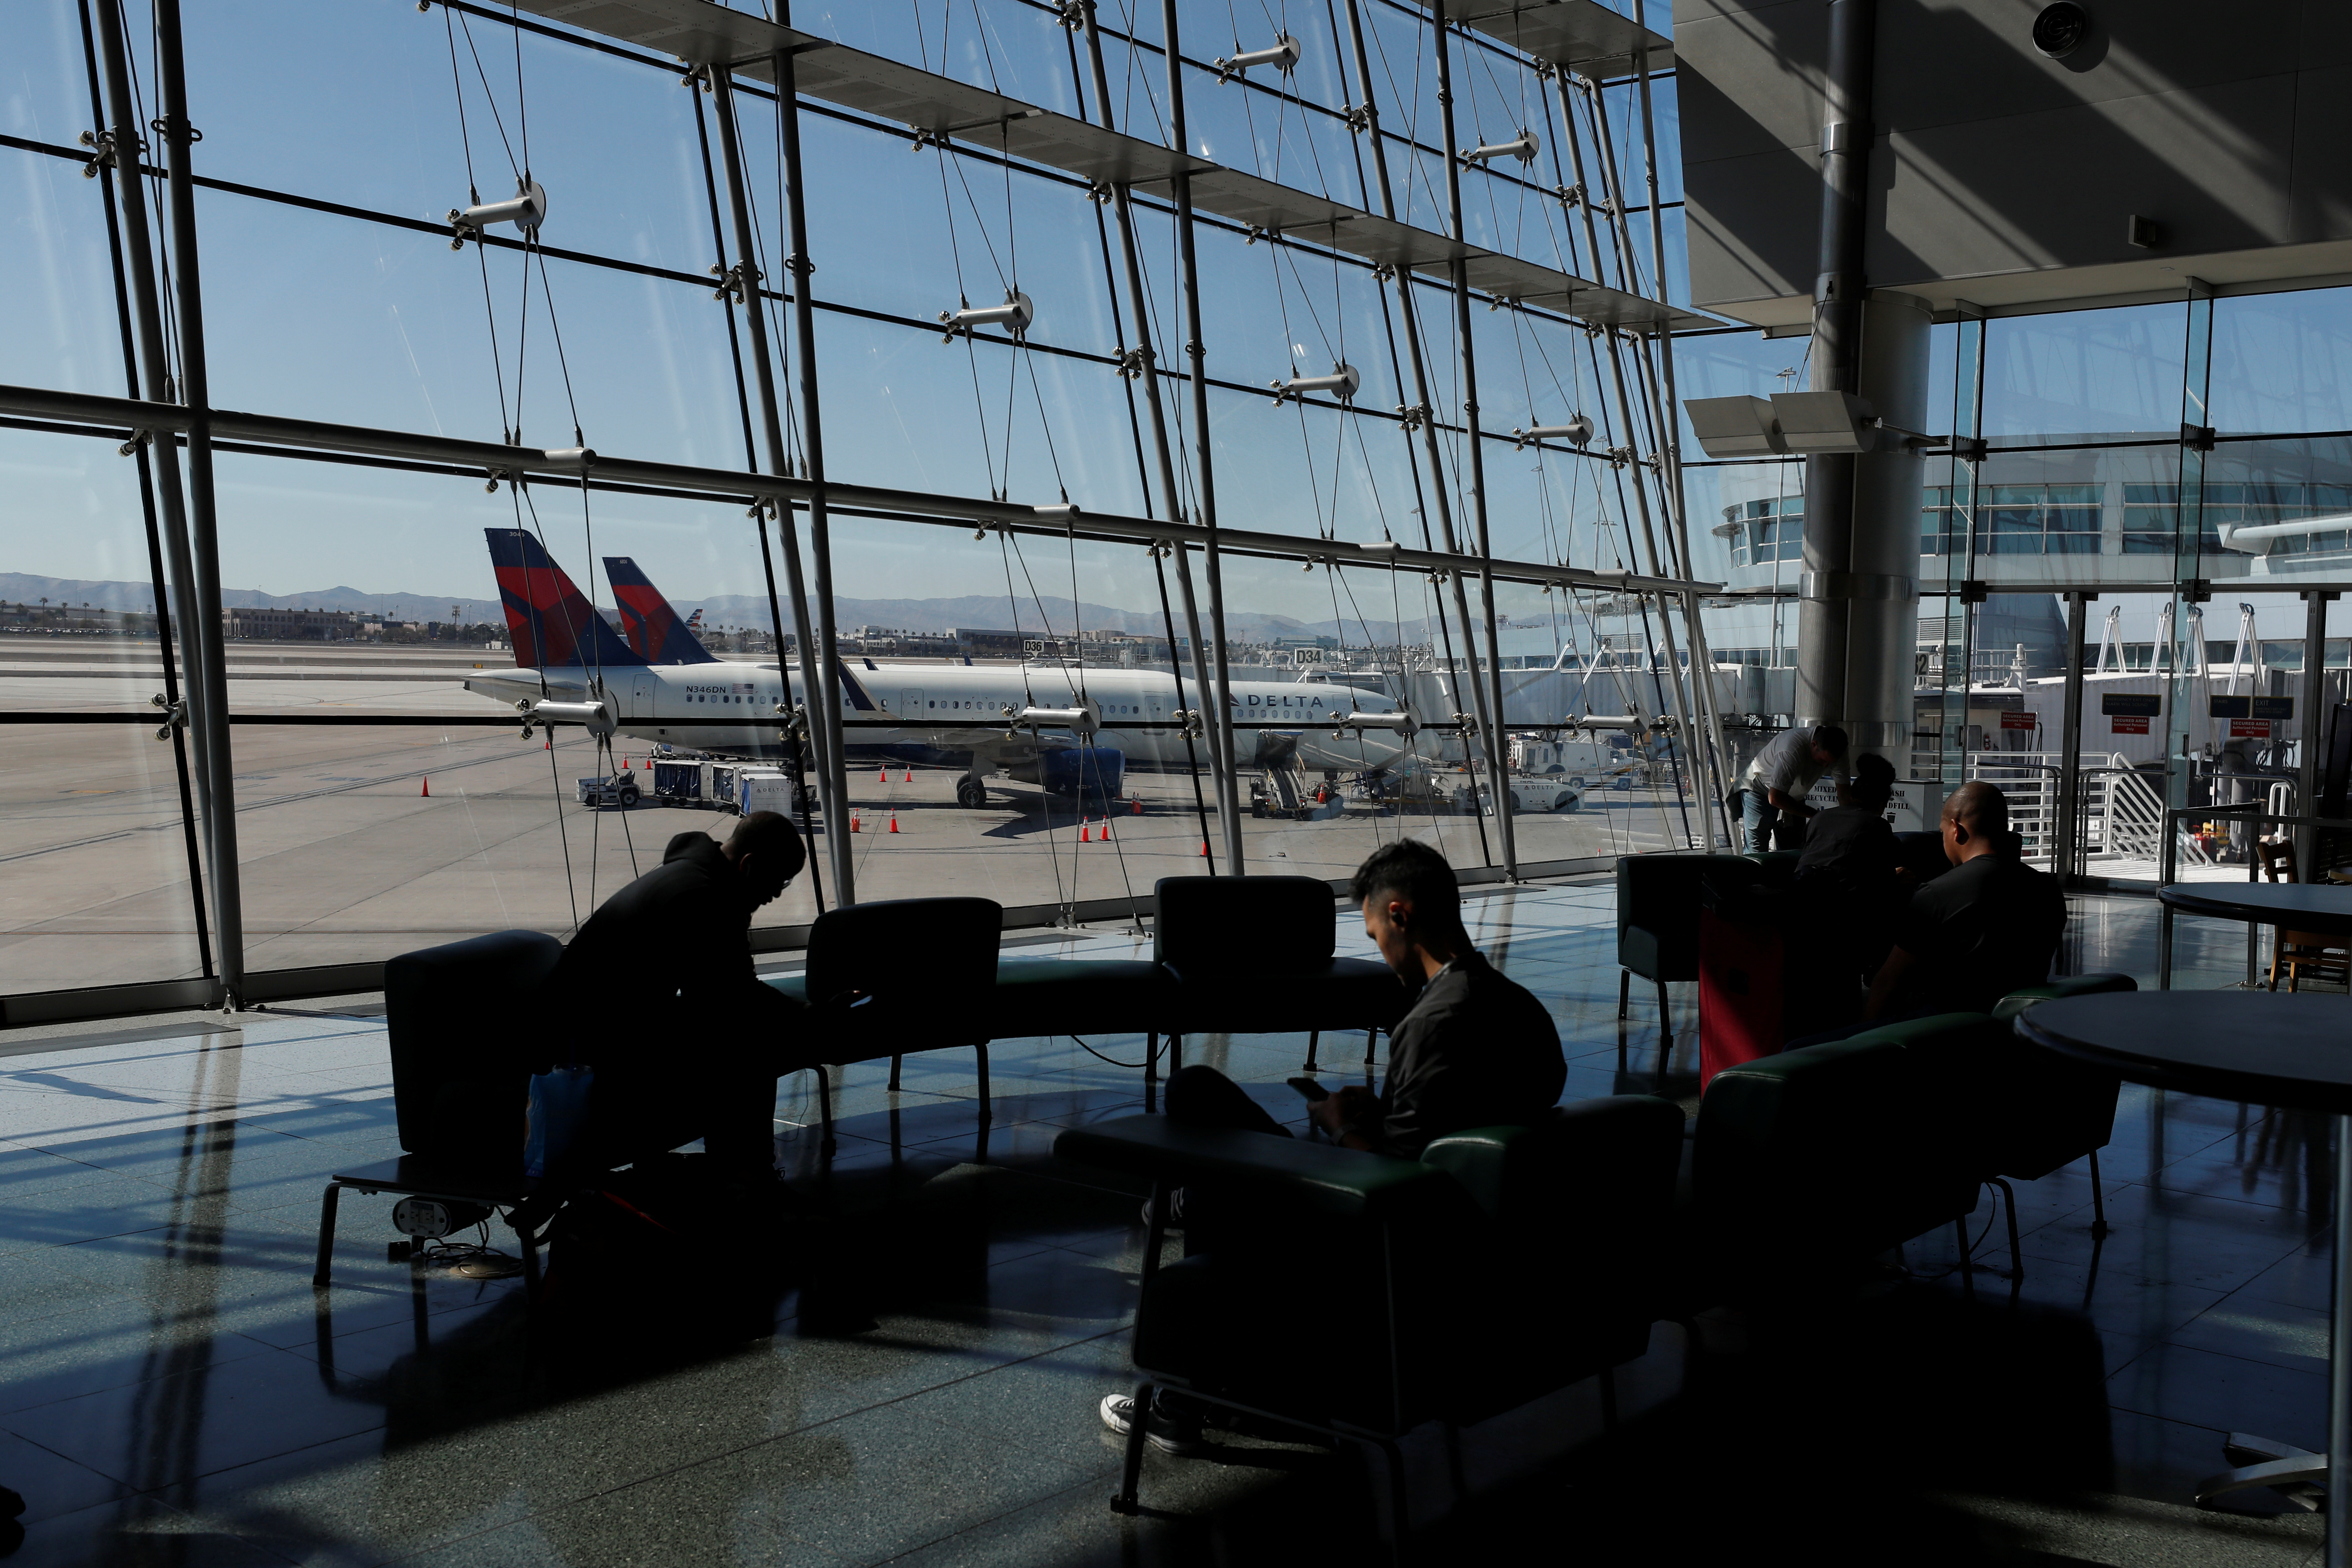 Travelers sit in a lounge area as Delta Air Lines plane park at a gate in McCarran International Airport in Las Vegas